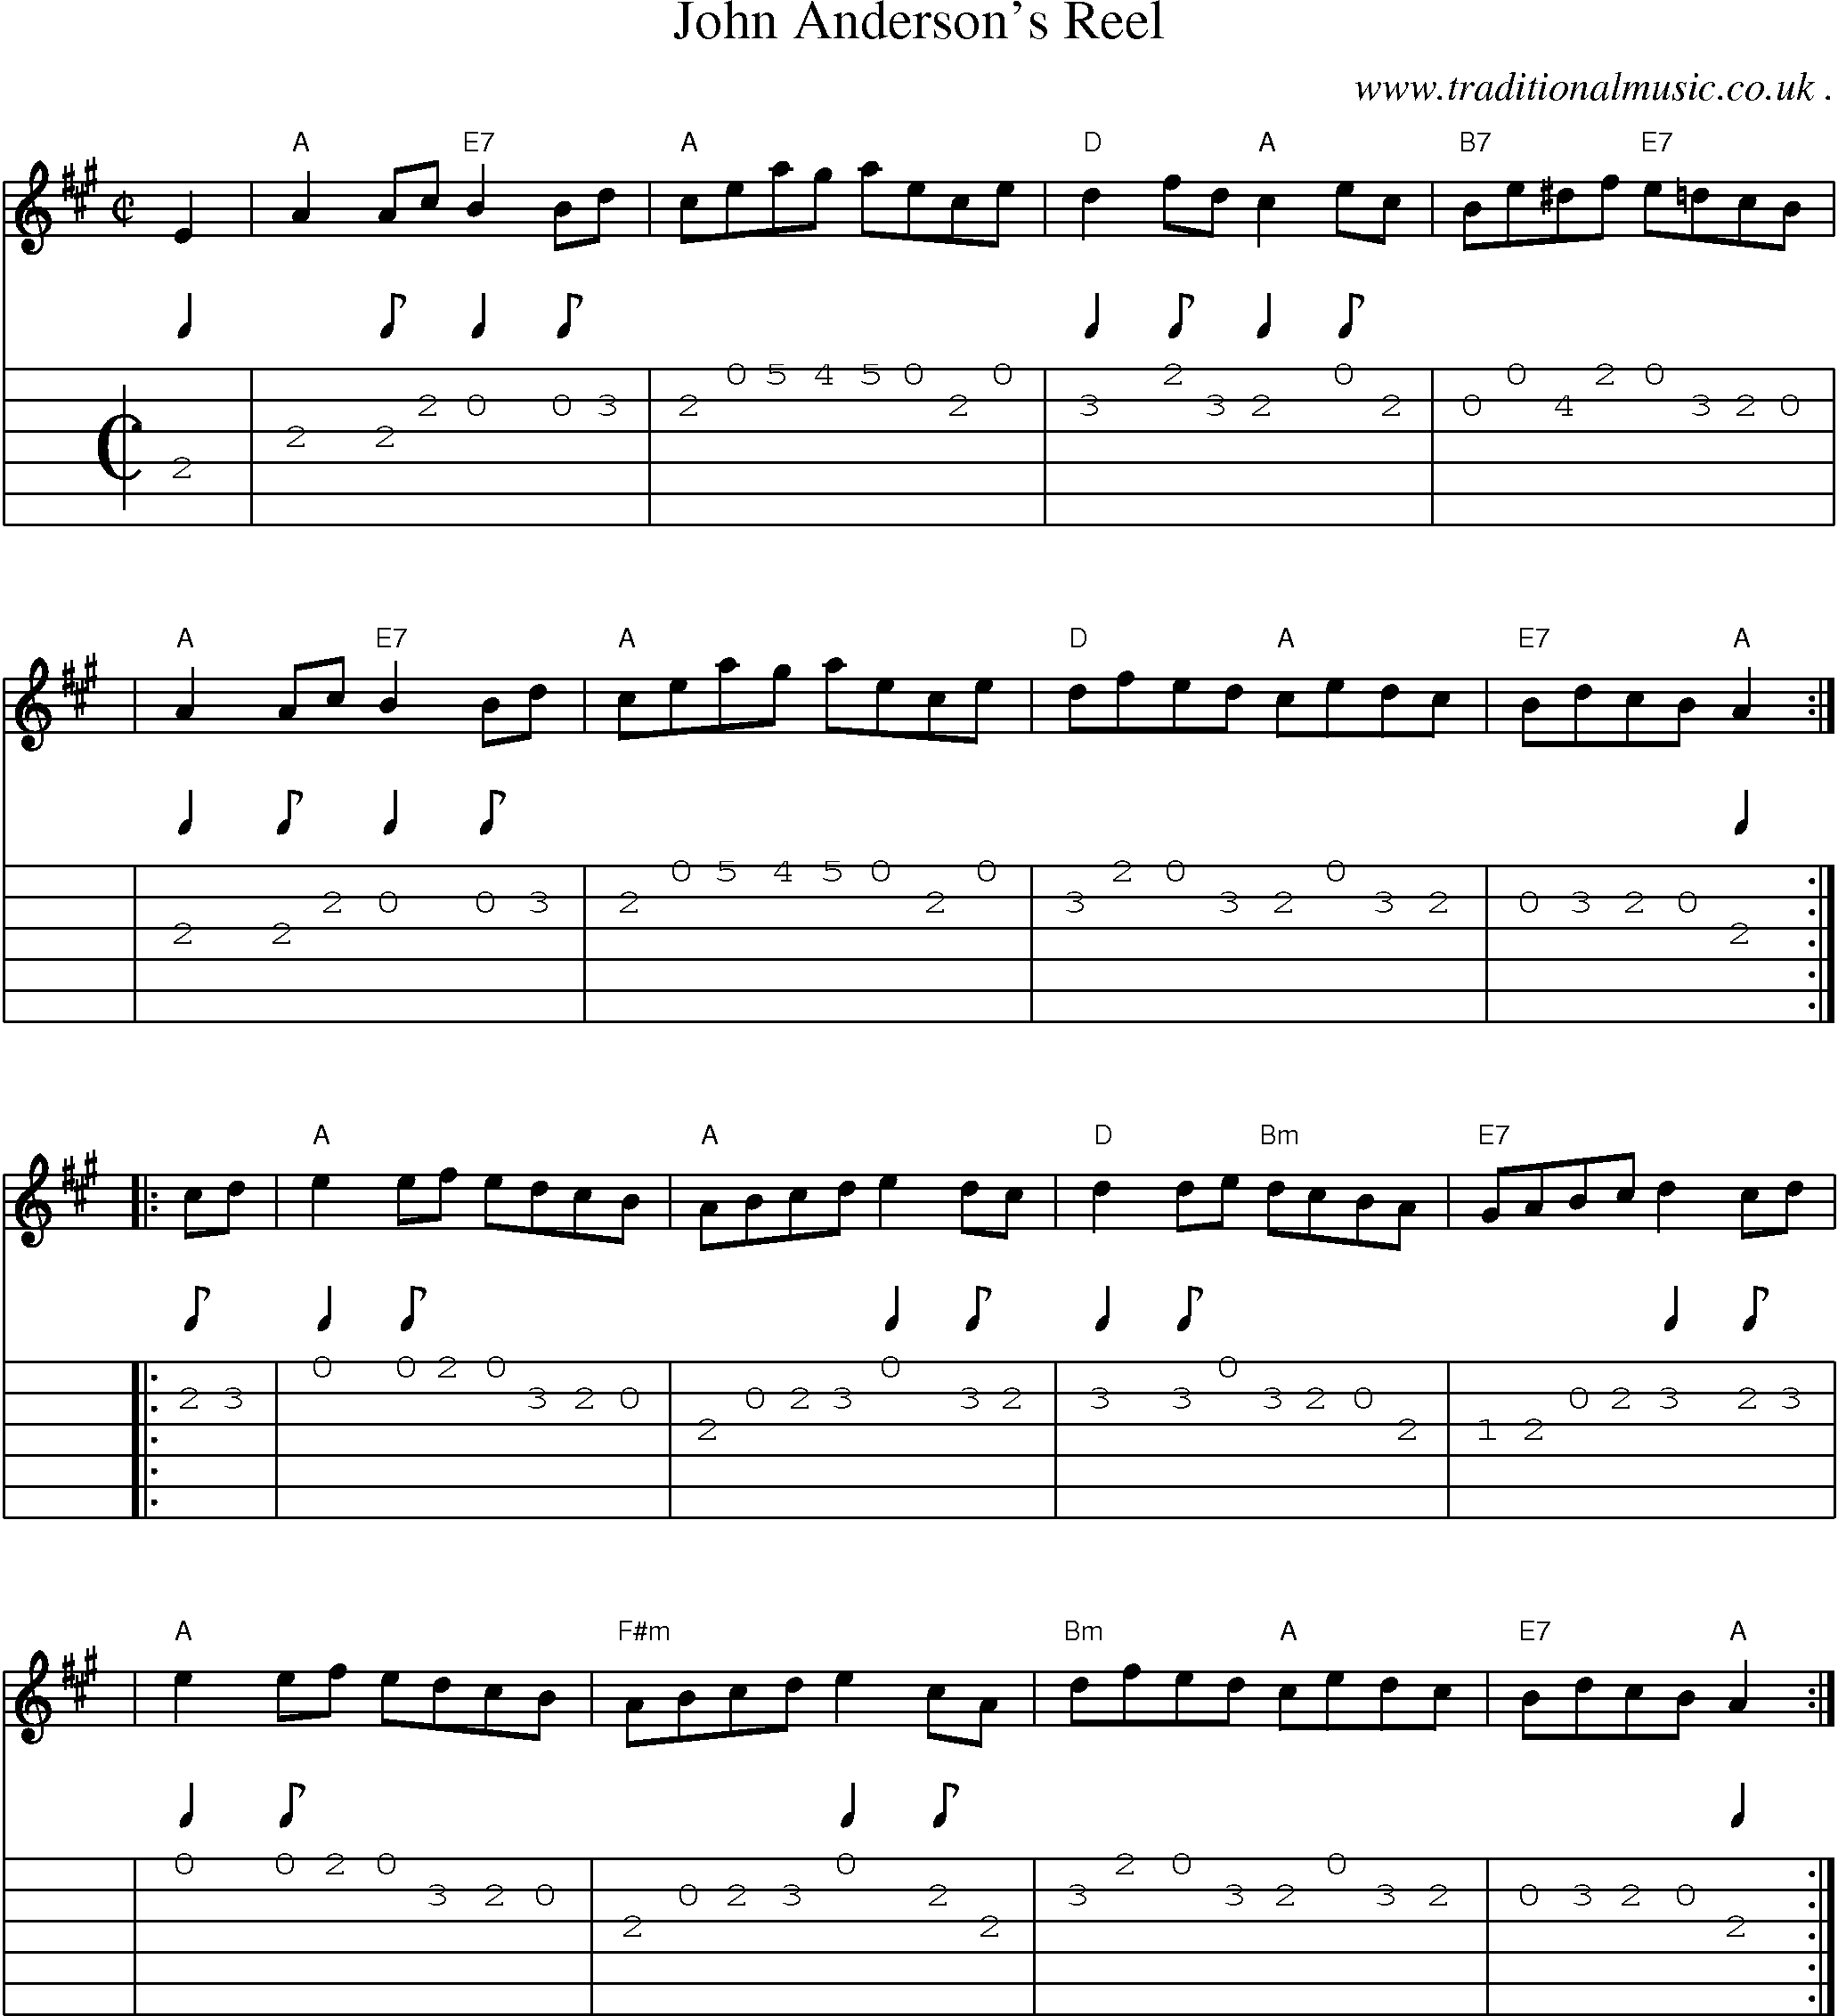 Sheet-music  score, Chords and Guitar Tabs for John Andersons Reel